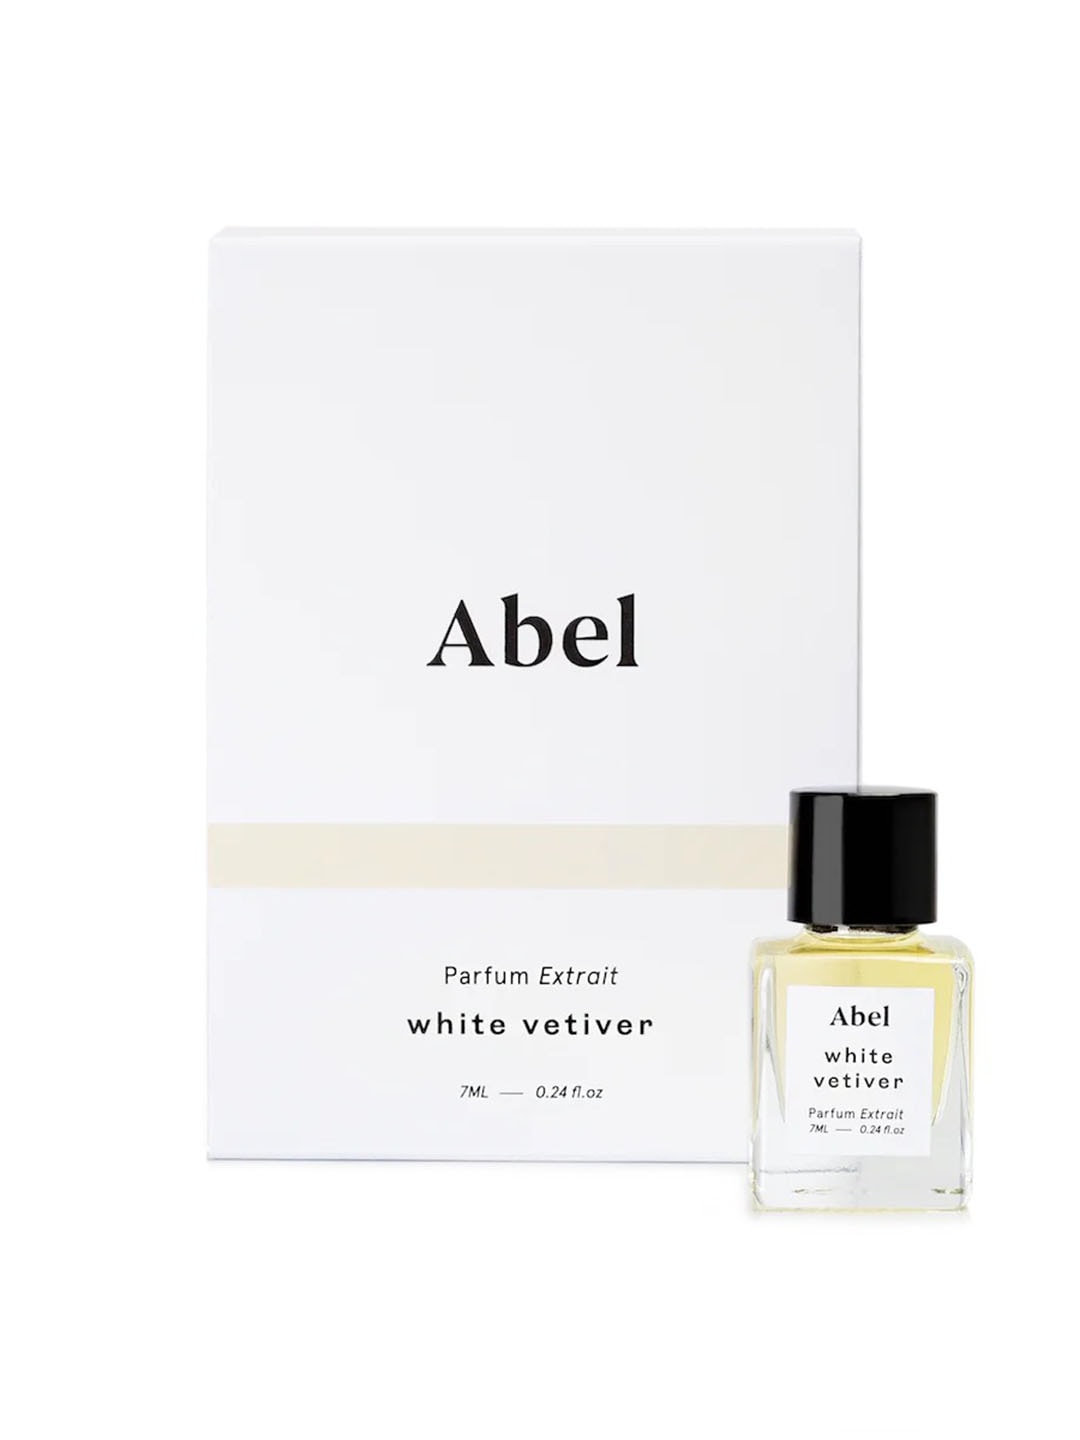 A bottle of White Vetiver Parfum Extrait – for energy by Abel in front of a white box.